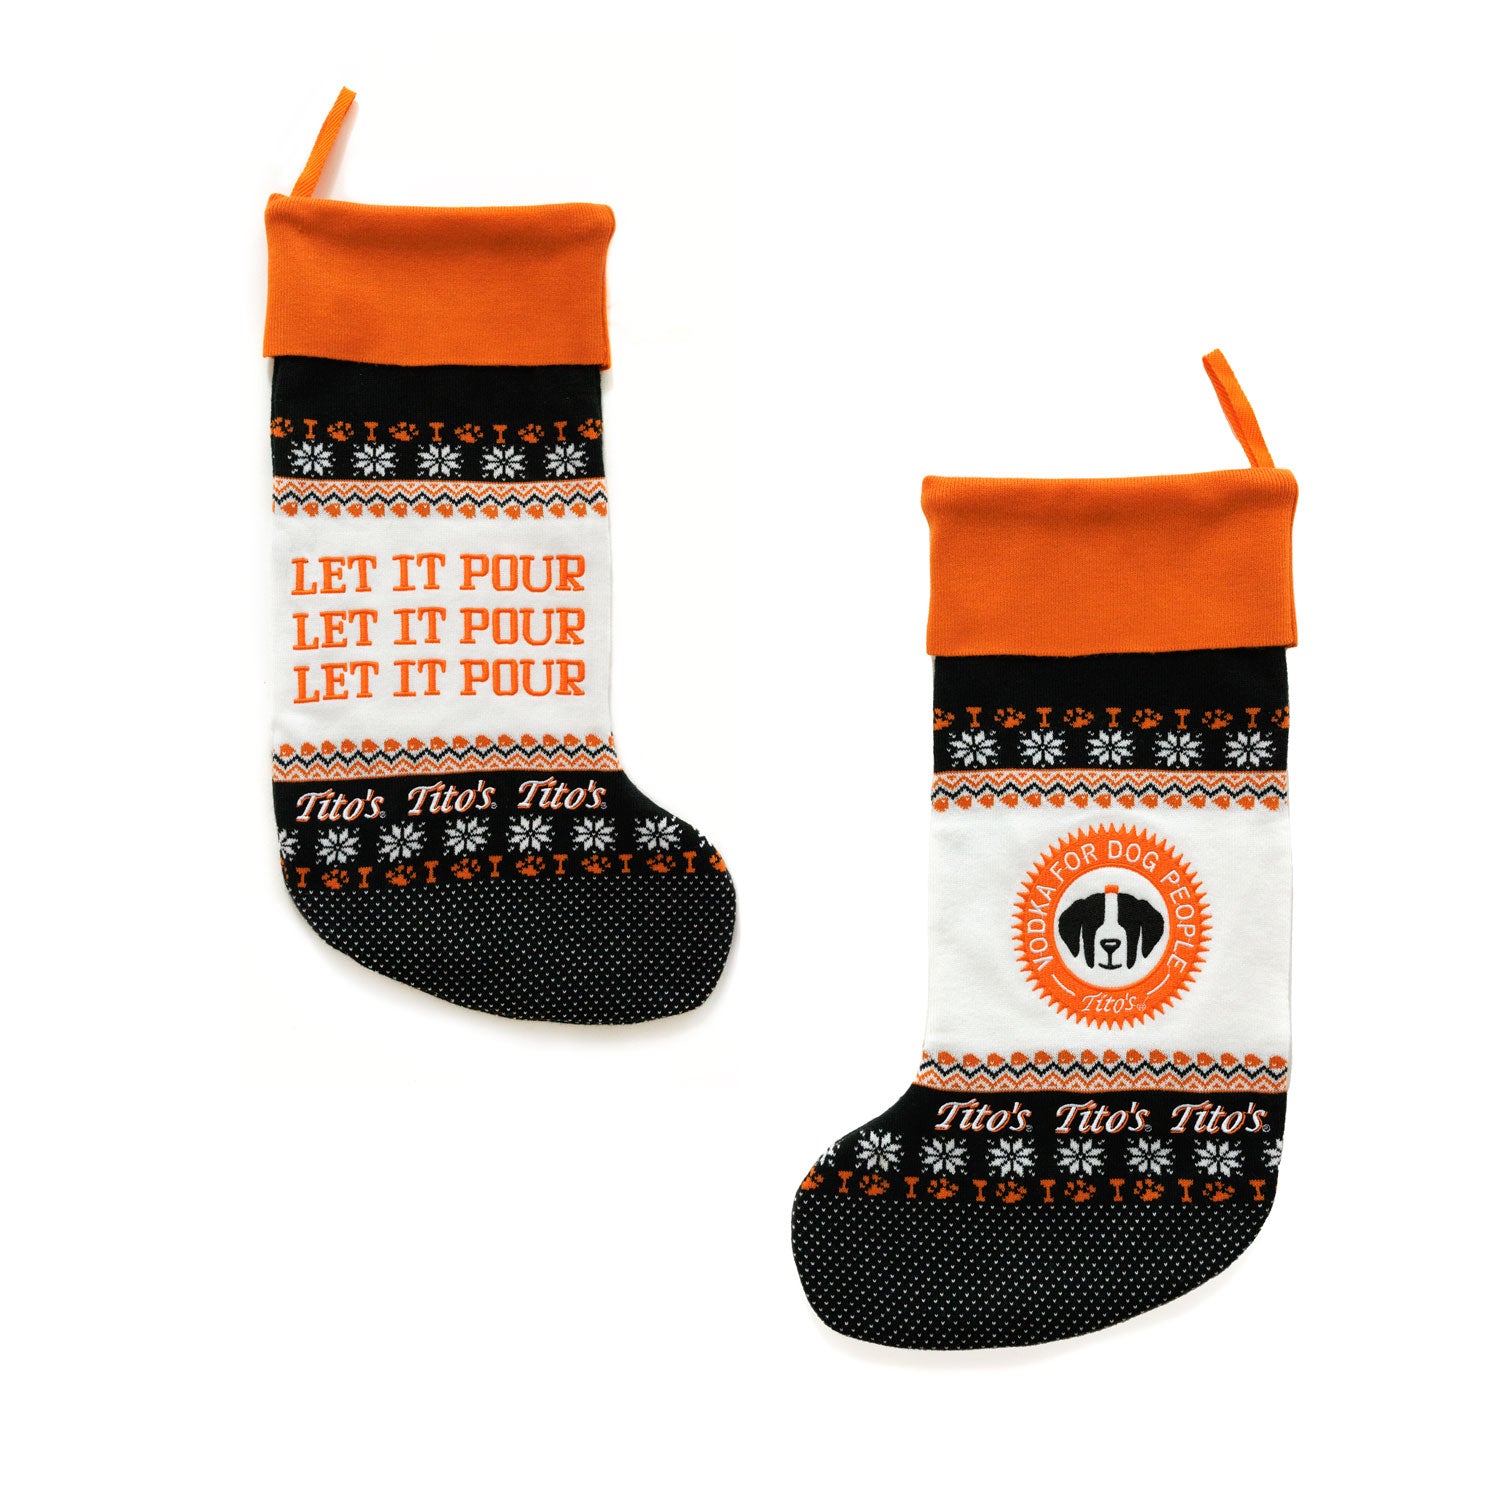 Front and back of black, white, and orange stocking with let it pour text, Vodka for Dog People logo, Tito's wordmark, and designs of snowflakes, paw prints, and martini glasses